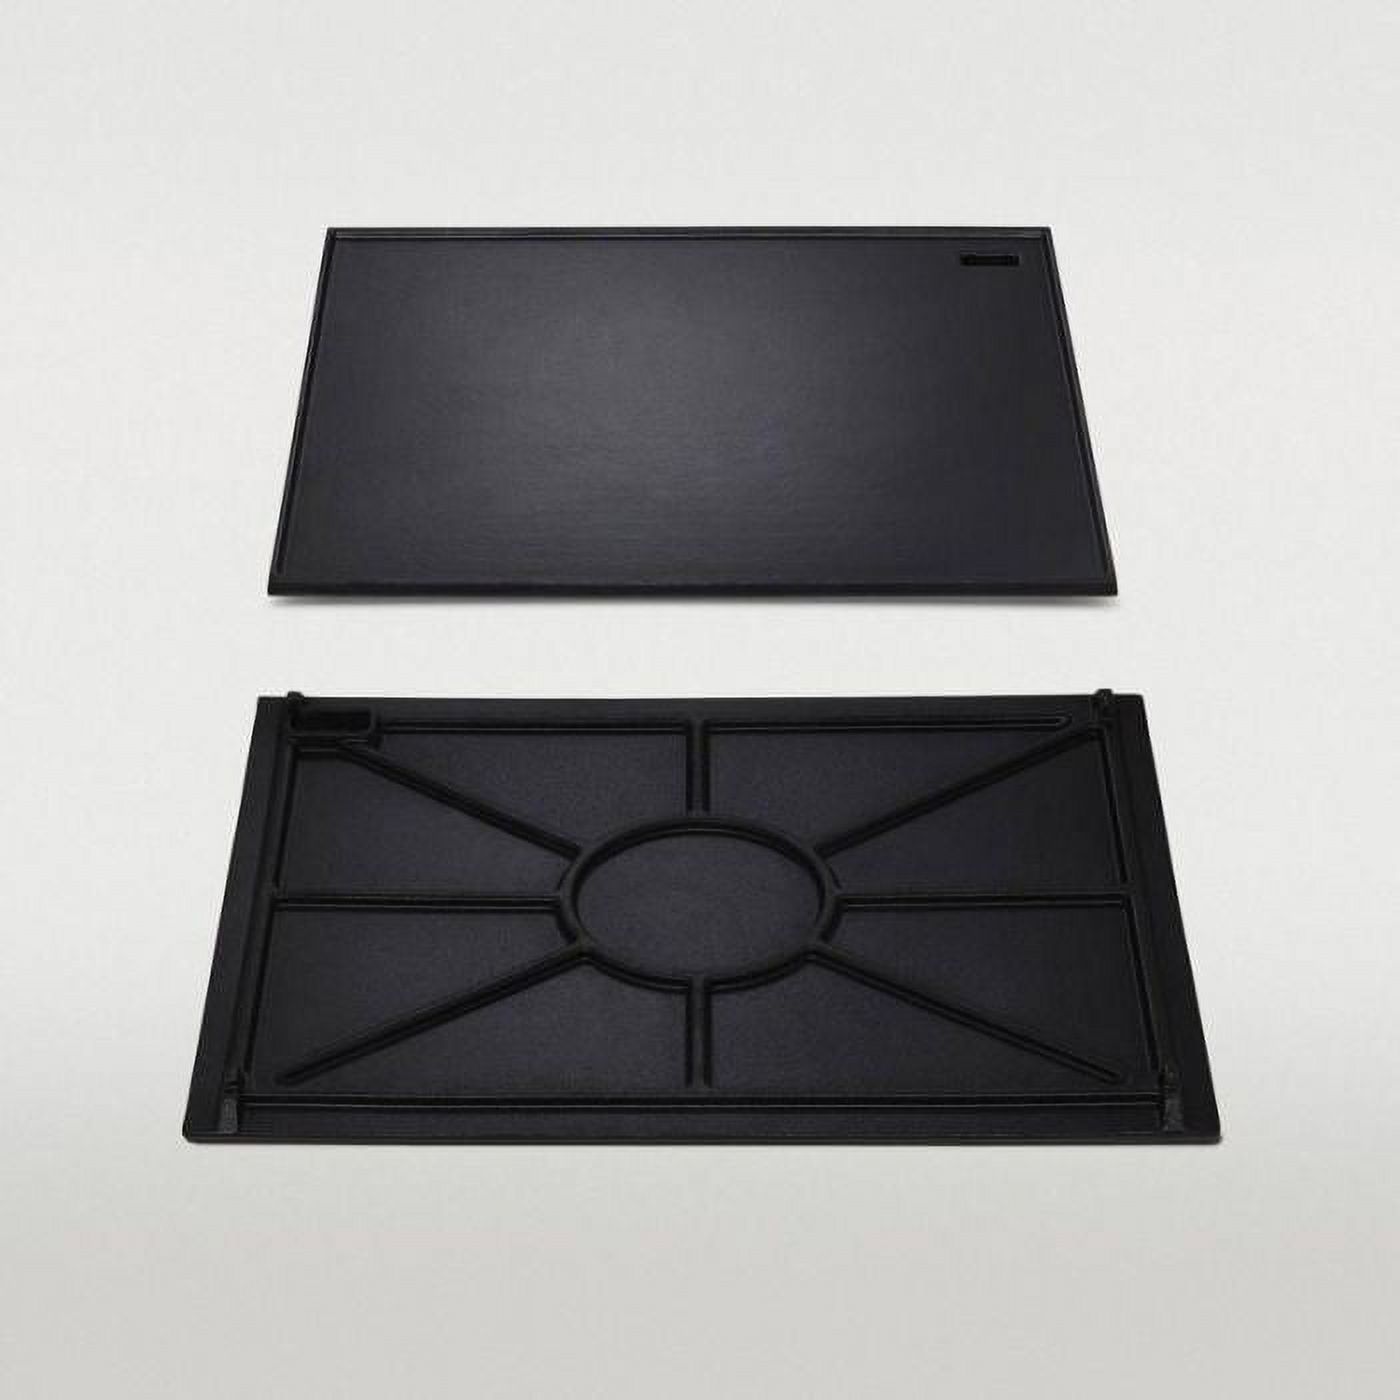 BakerStone Original Series Cast Iron Griddle - image 1 of 1